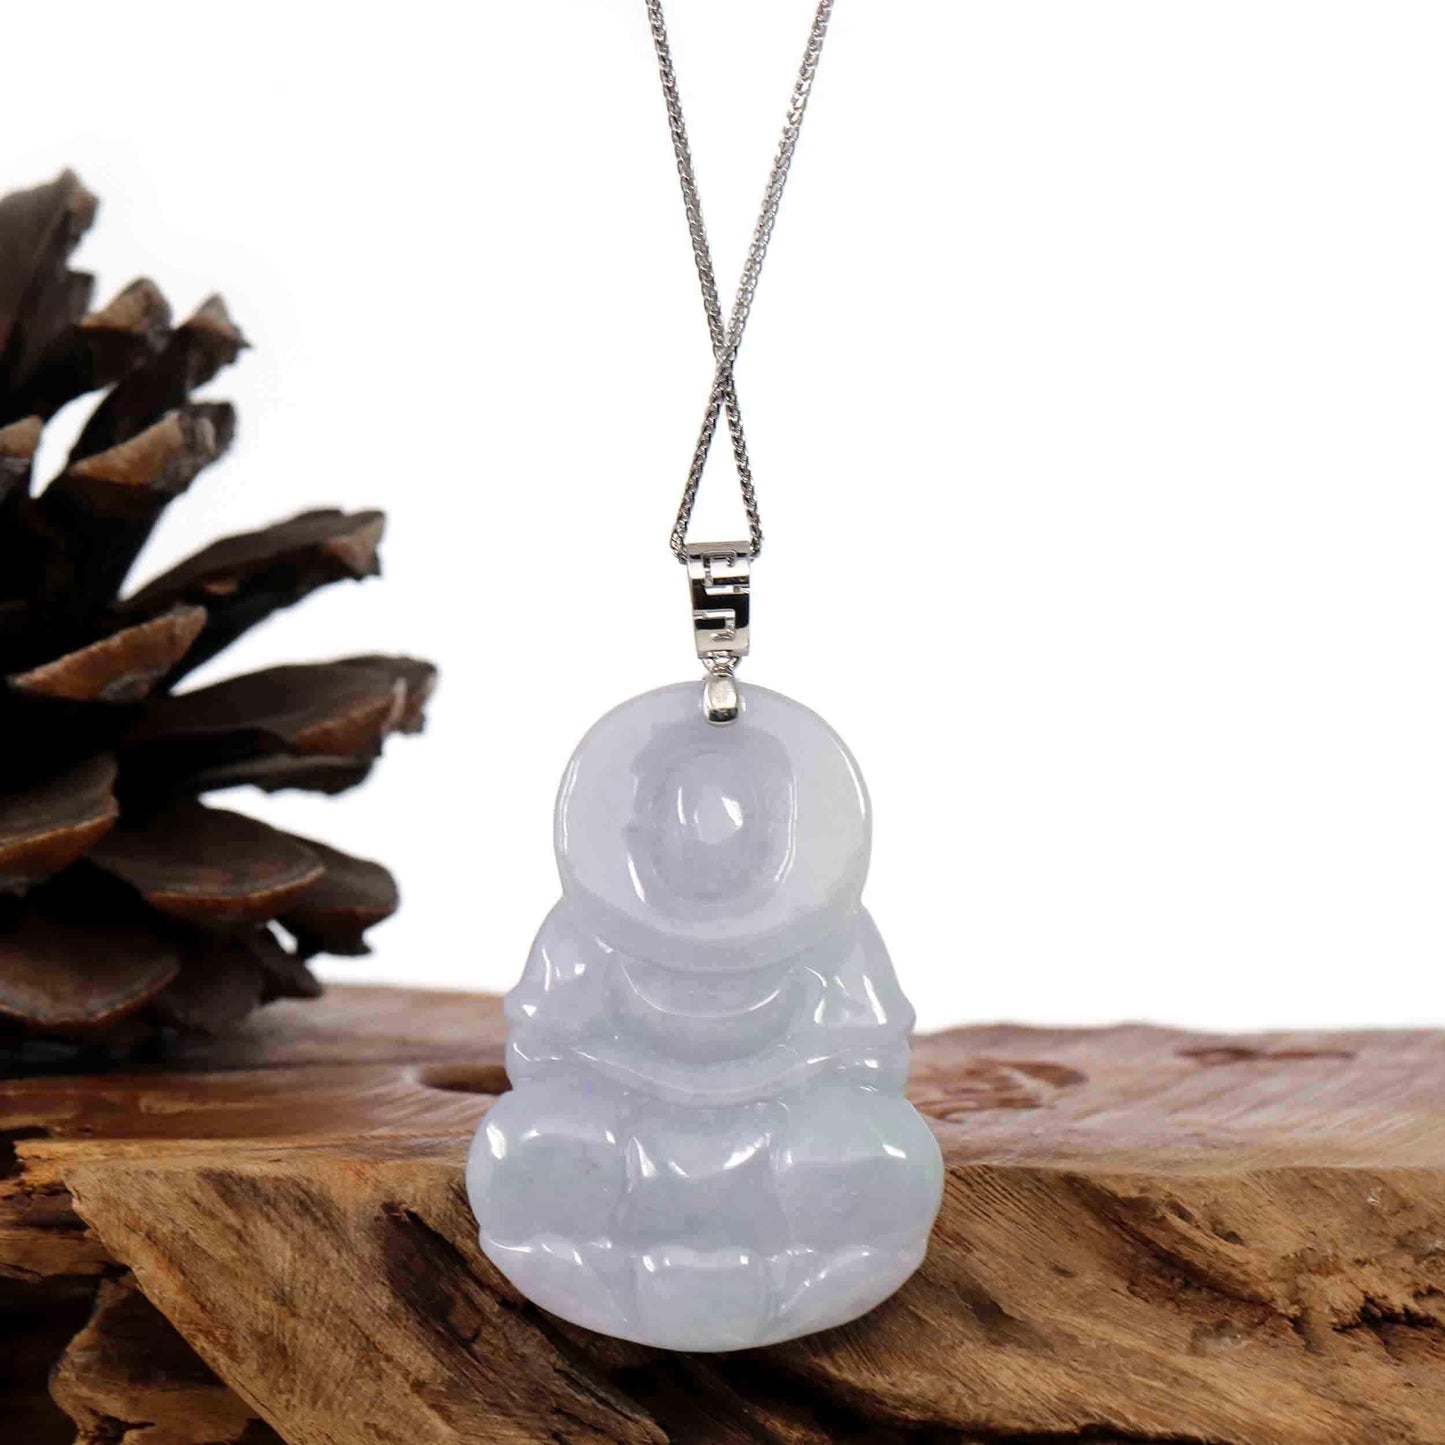 RealJade® Co. Jade Guanyin Pendant Necklace  "Goddess of Compassion" 14k Yellow Gold Genuine Burmese Jadeite Jade Guanyin Necklace With Good Luck Design